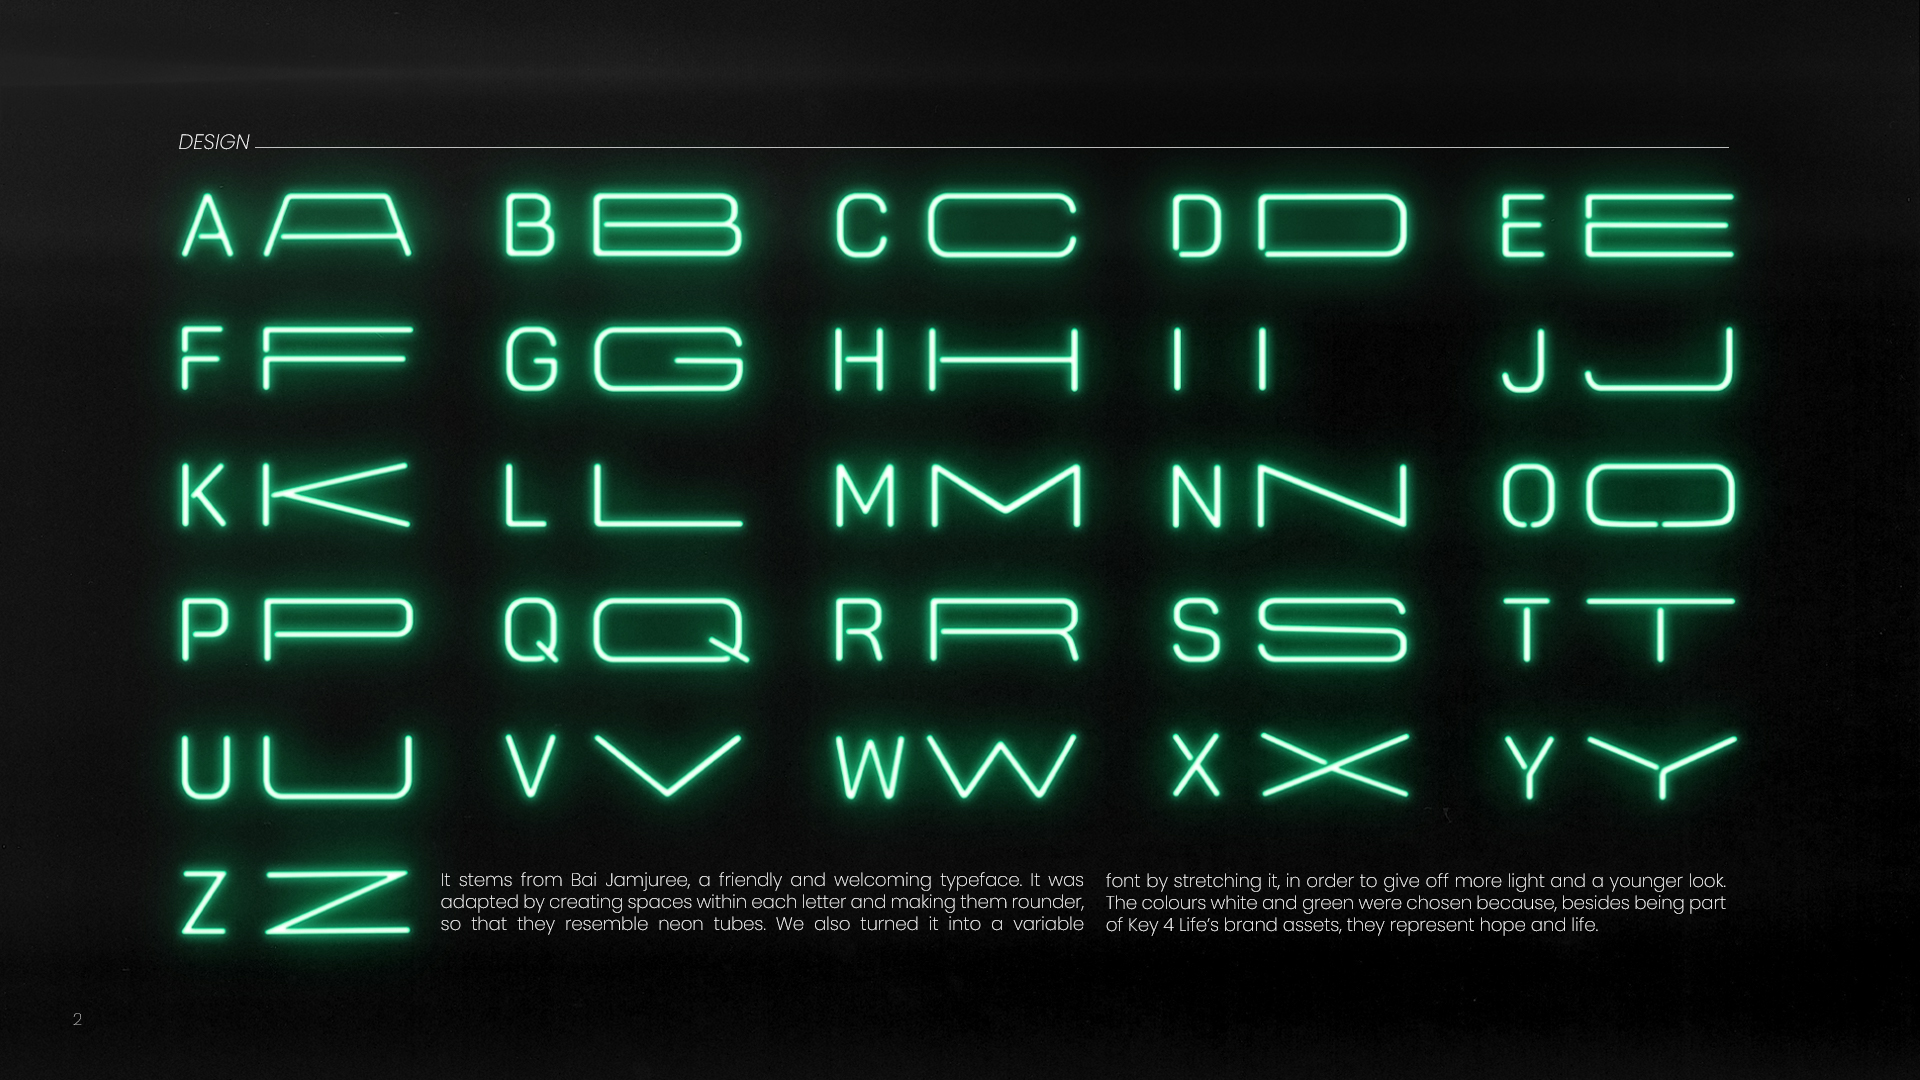 Image shows neon typeface produced by Clara and Pia for the D&AD awards 